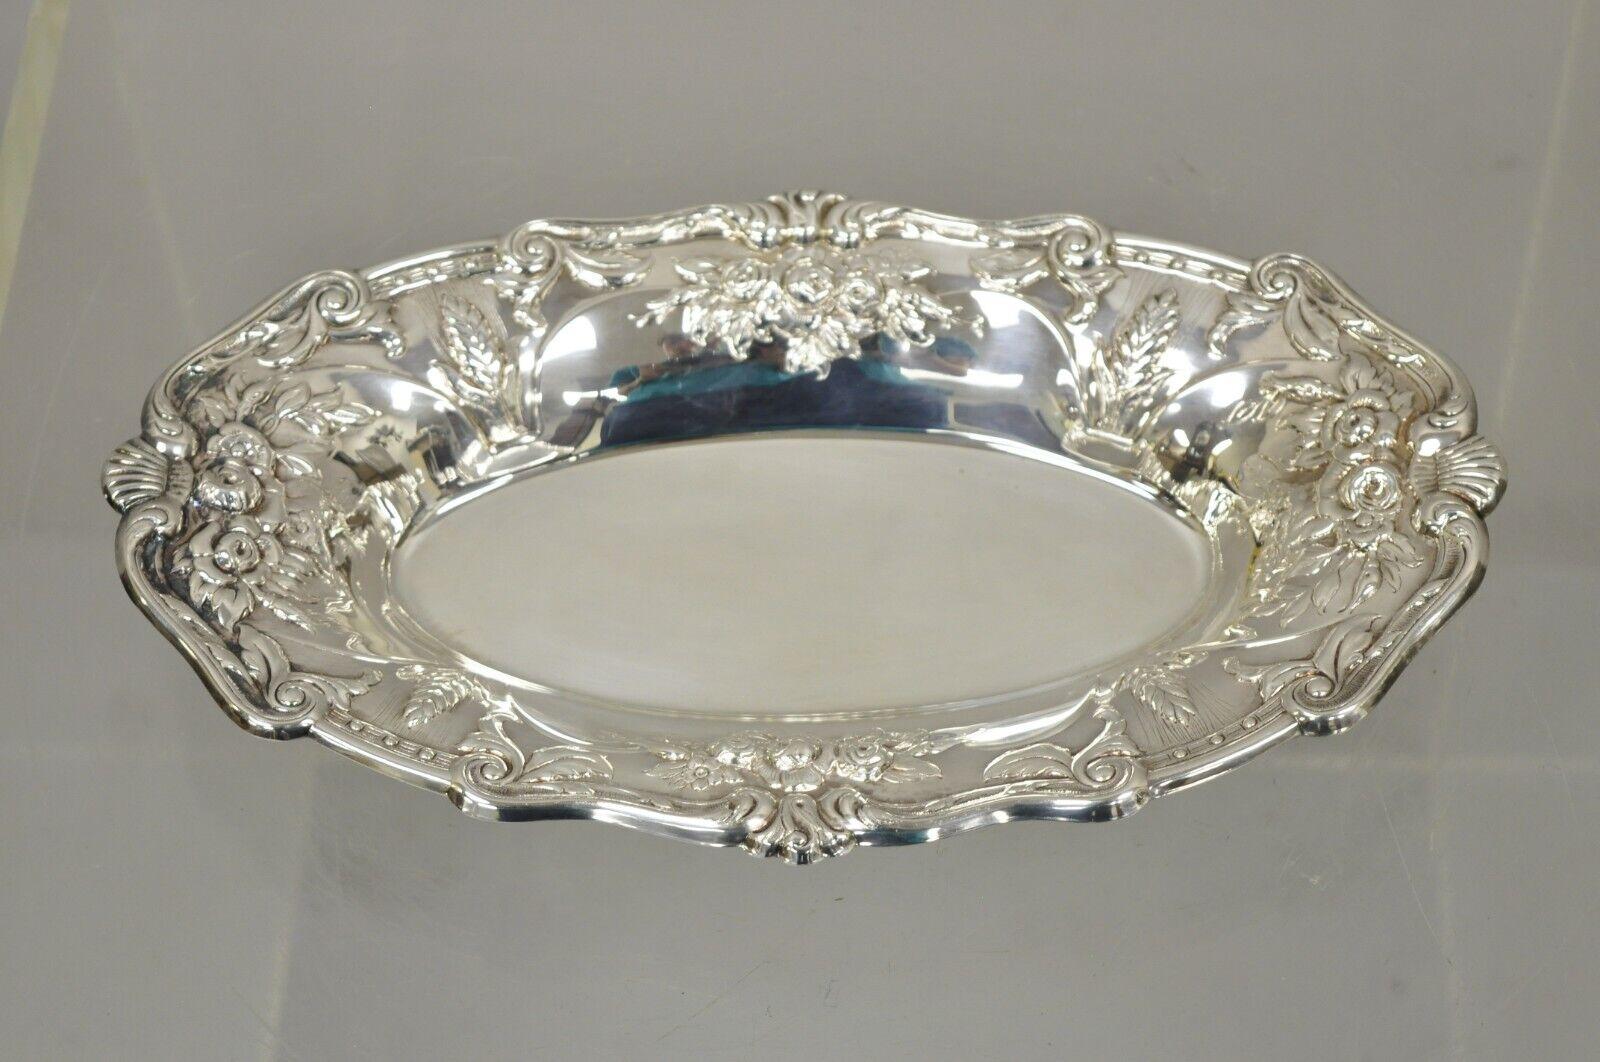 Vintage Floral Embossed Victorian Silver Plate Oval Dish by PS & Co For Sale 4